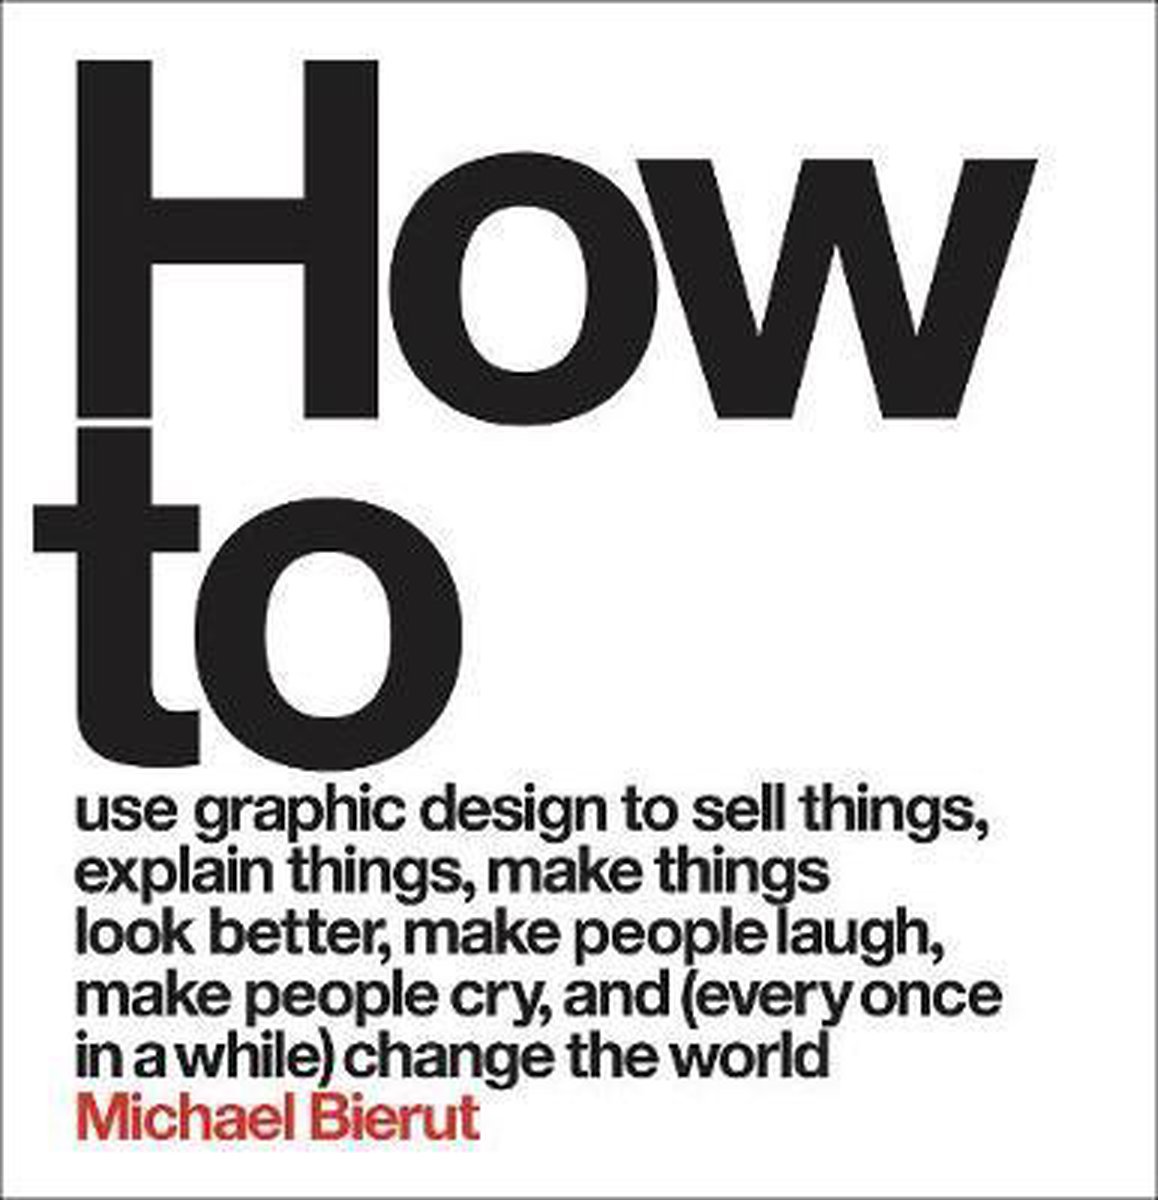 How to use graphic design to sell things, explain things, make things look better, make people laugh, make people cry, and every once in a while change the world - Michael Bierut